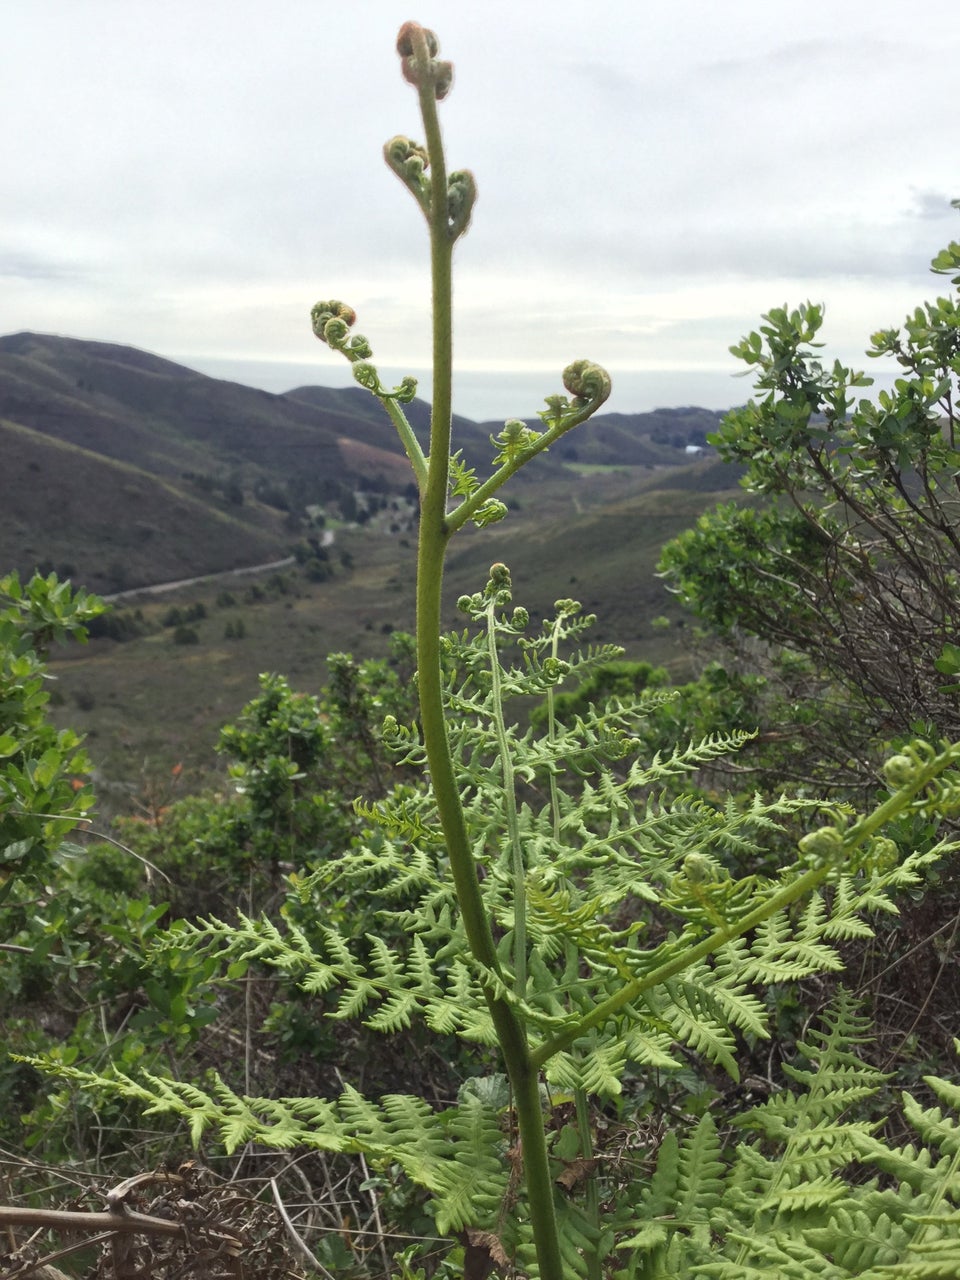 New fern plant unfurling its spiral branches and leaves, Rodeo Valley in the distance, out of focus.